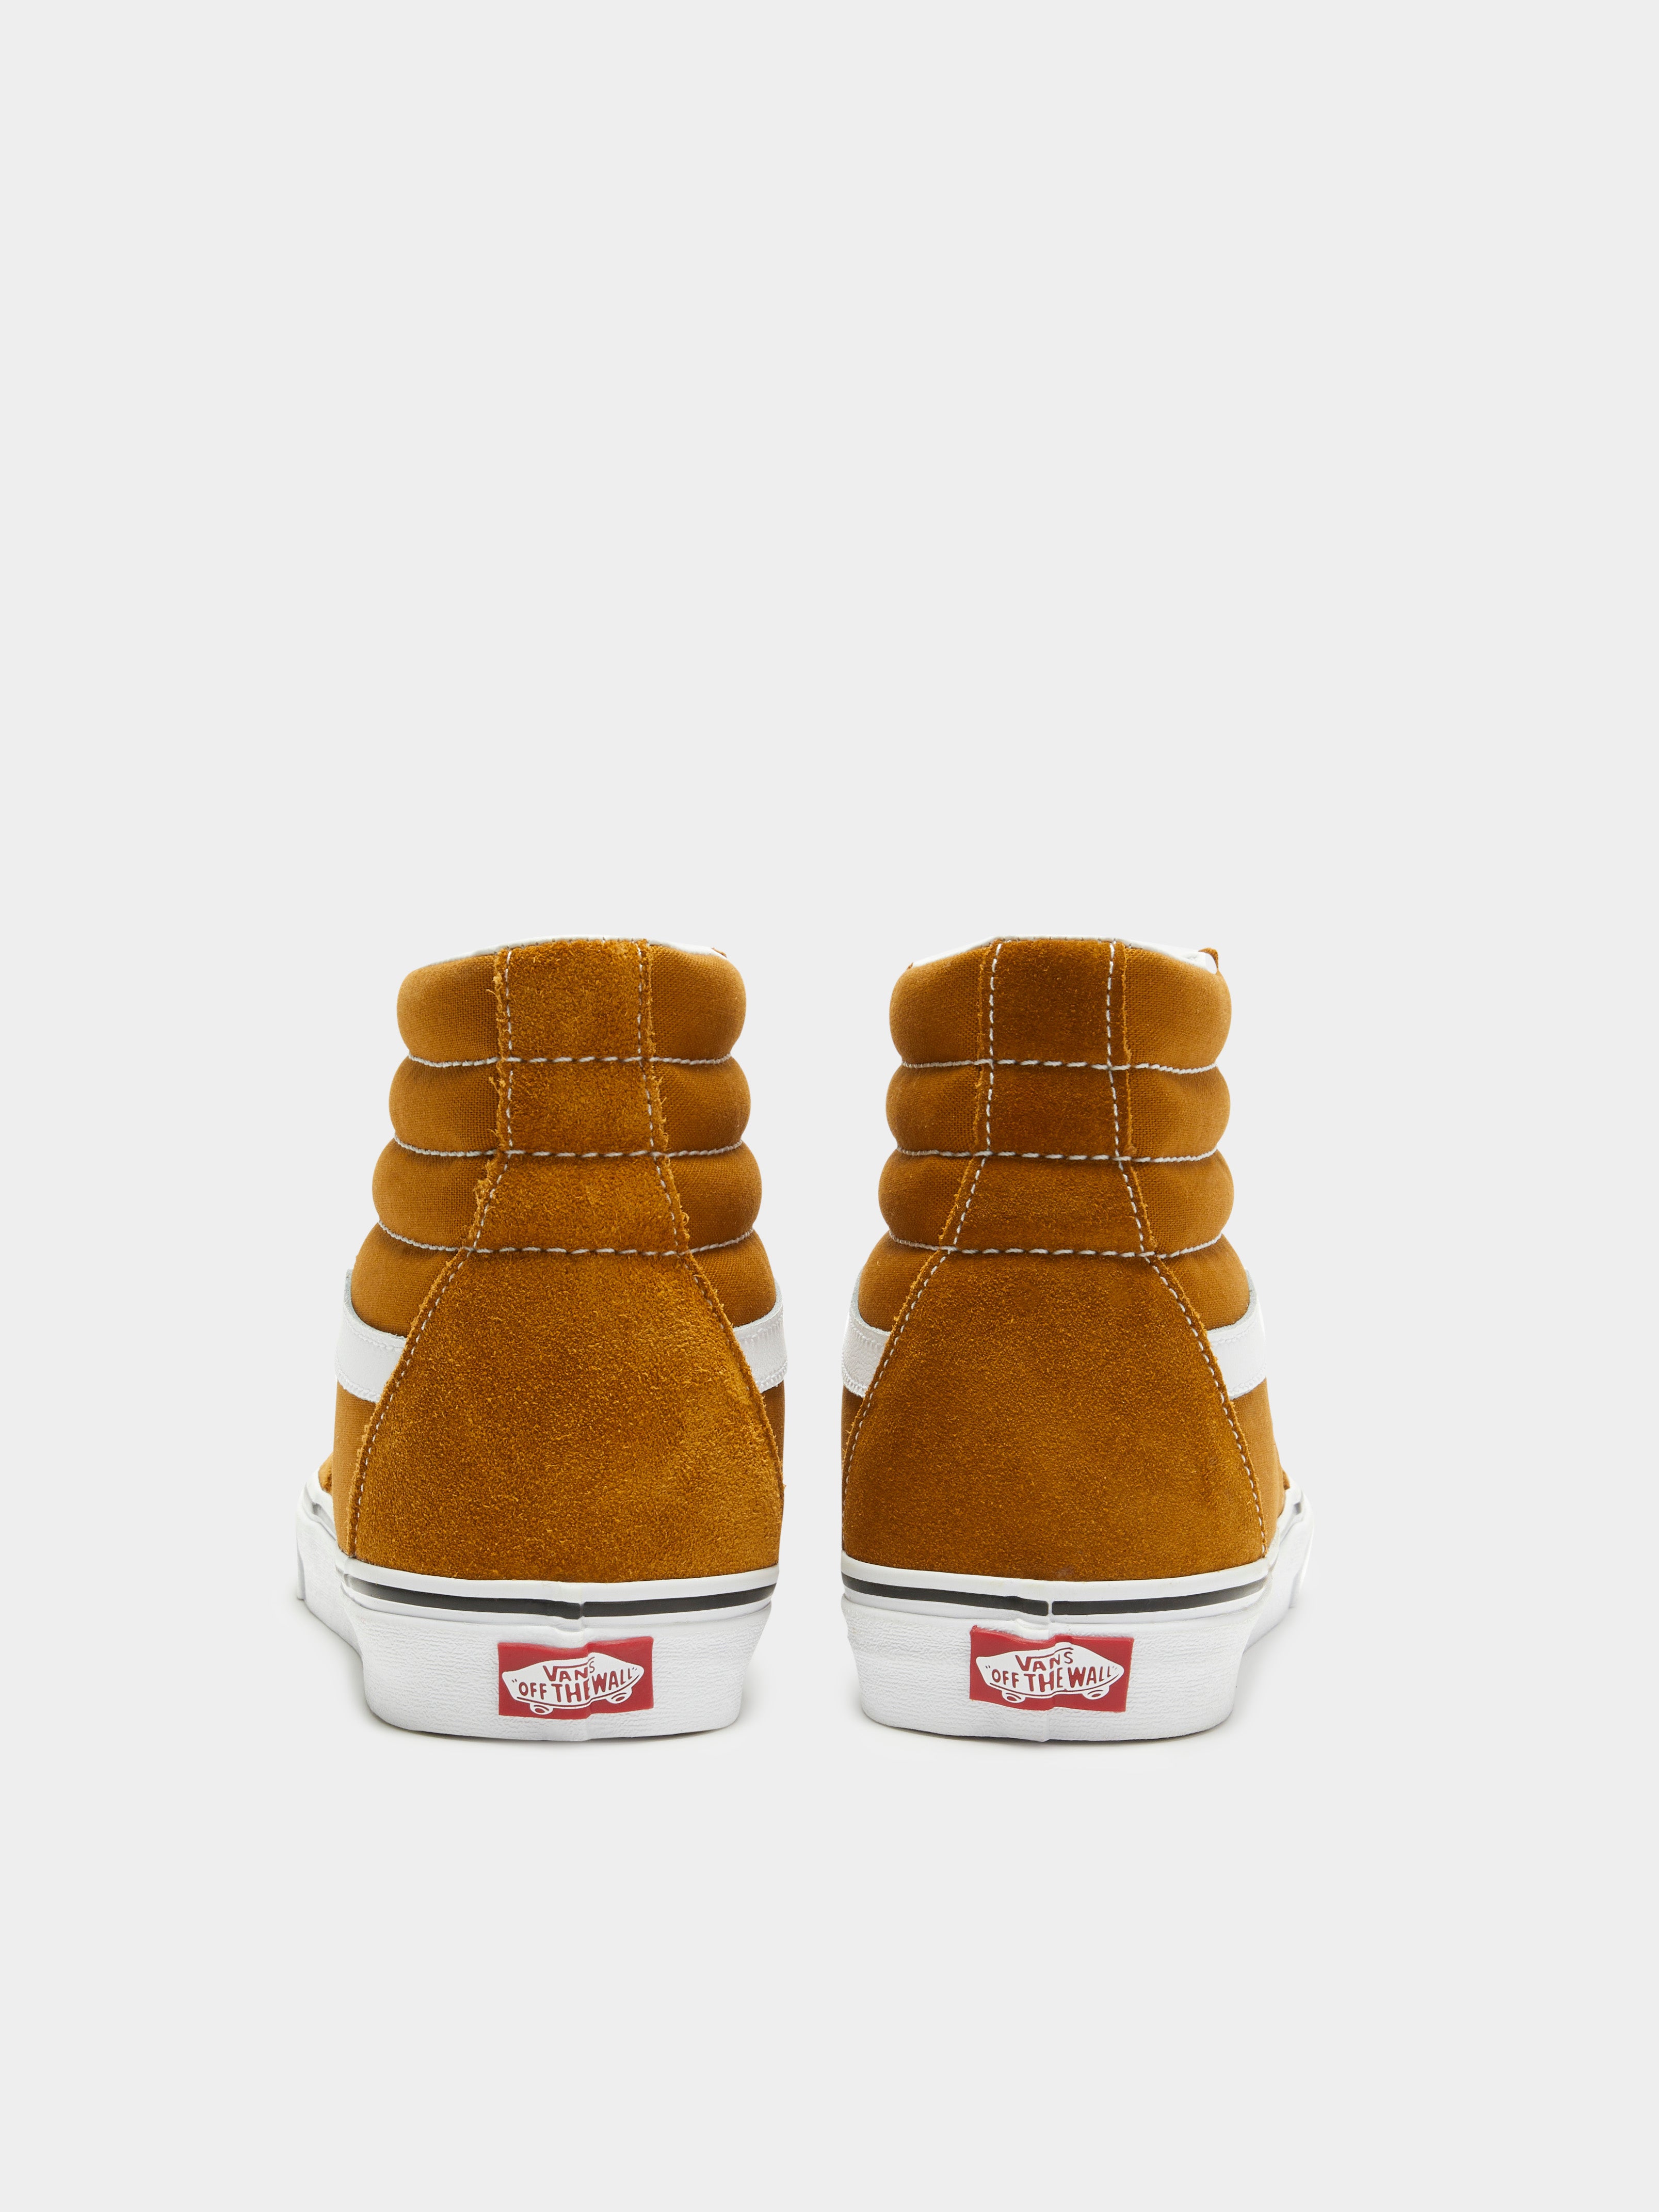 Unisex Sk8 High Colour Theory Sneakers in Golden Brown